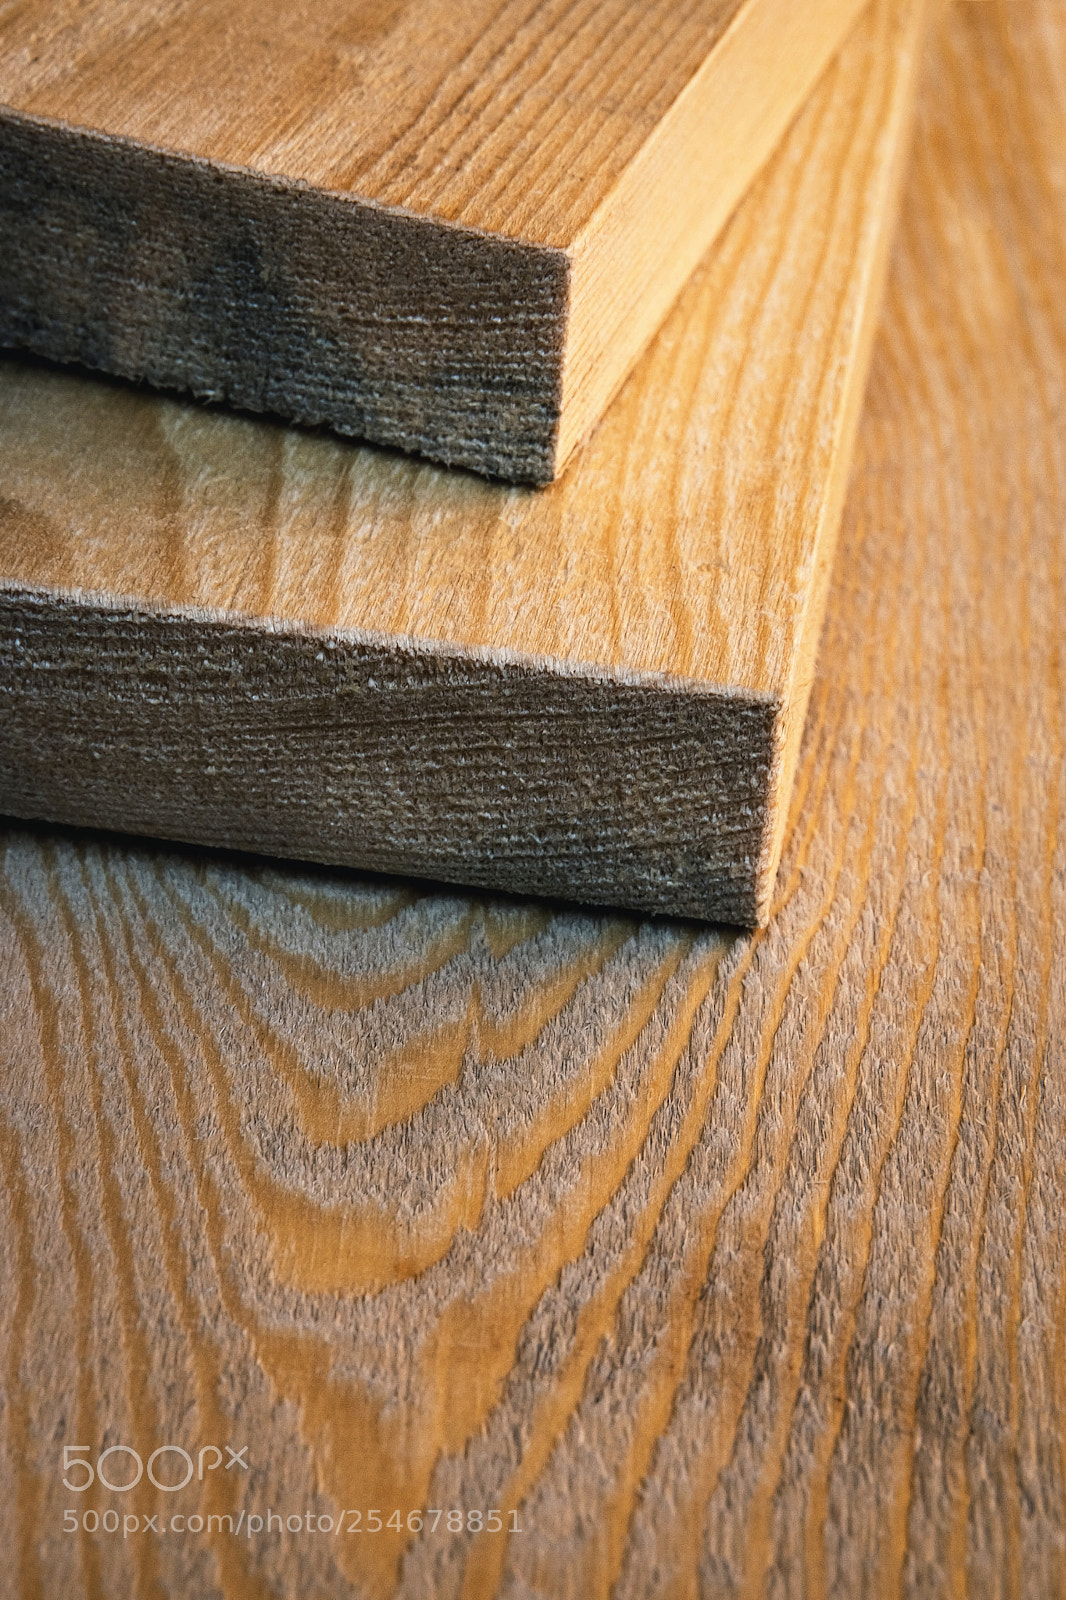 Nikon D5500 sample photo. Detail of spruce boards photography